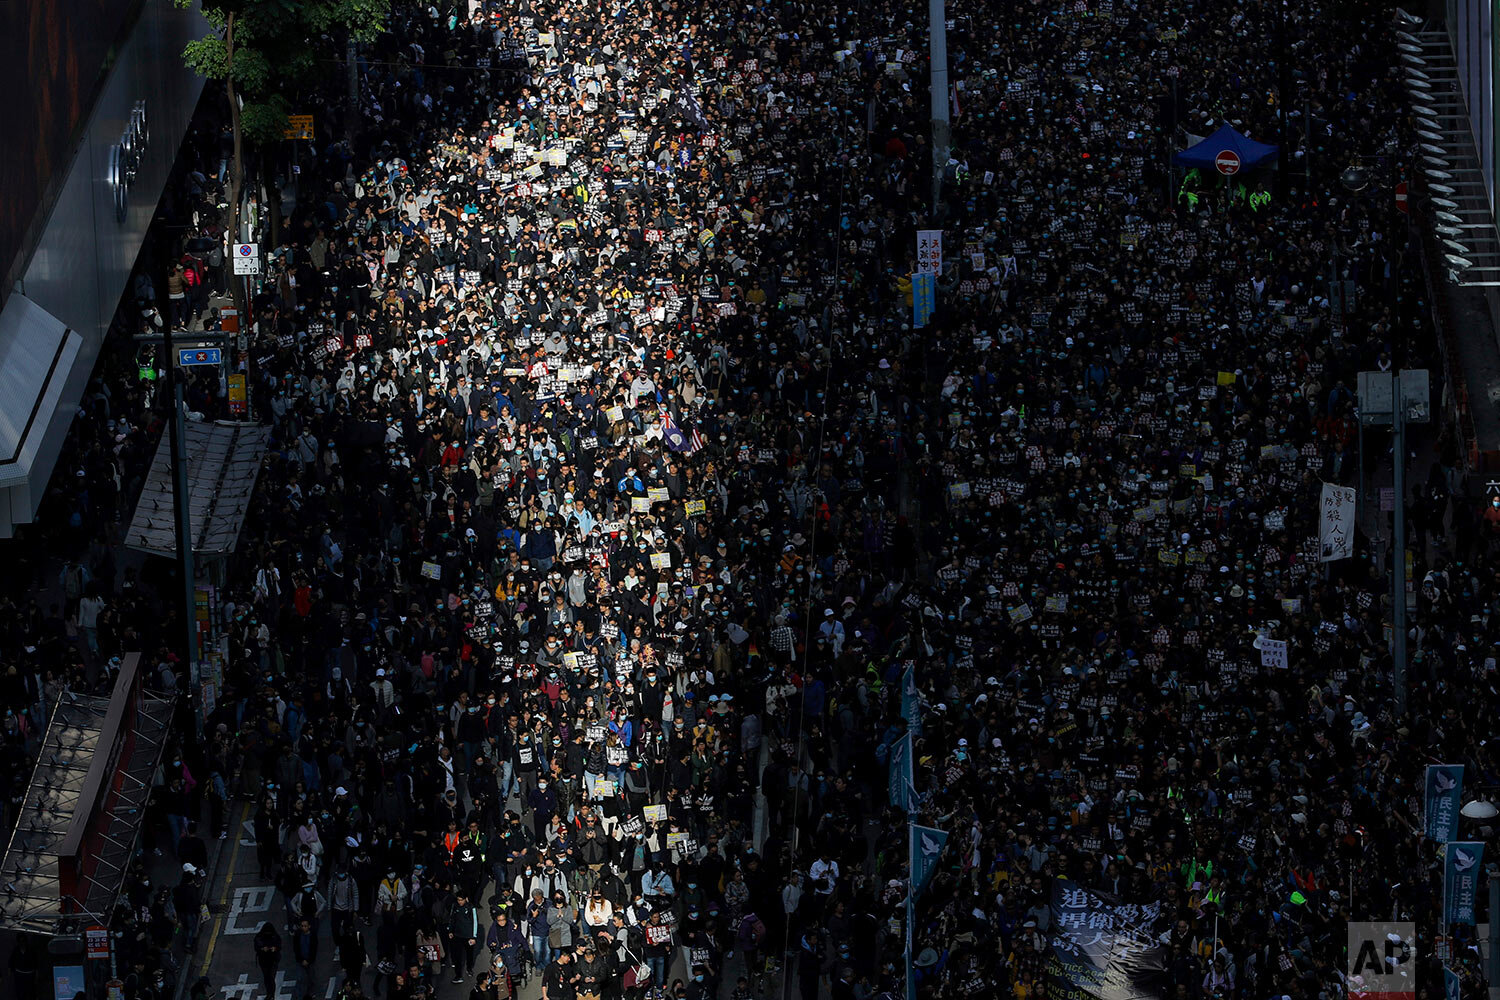  A beam of sunlight shines on pro-democracy protesters as they march on a street in Hong Kong, Sunday, Dec. 8, 2019. Thousands of people took to the streets of Hong Kong on Sunday in a march seen as a test of the enduring appeal of an anti-government